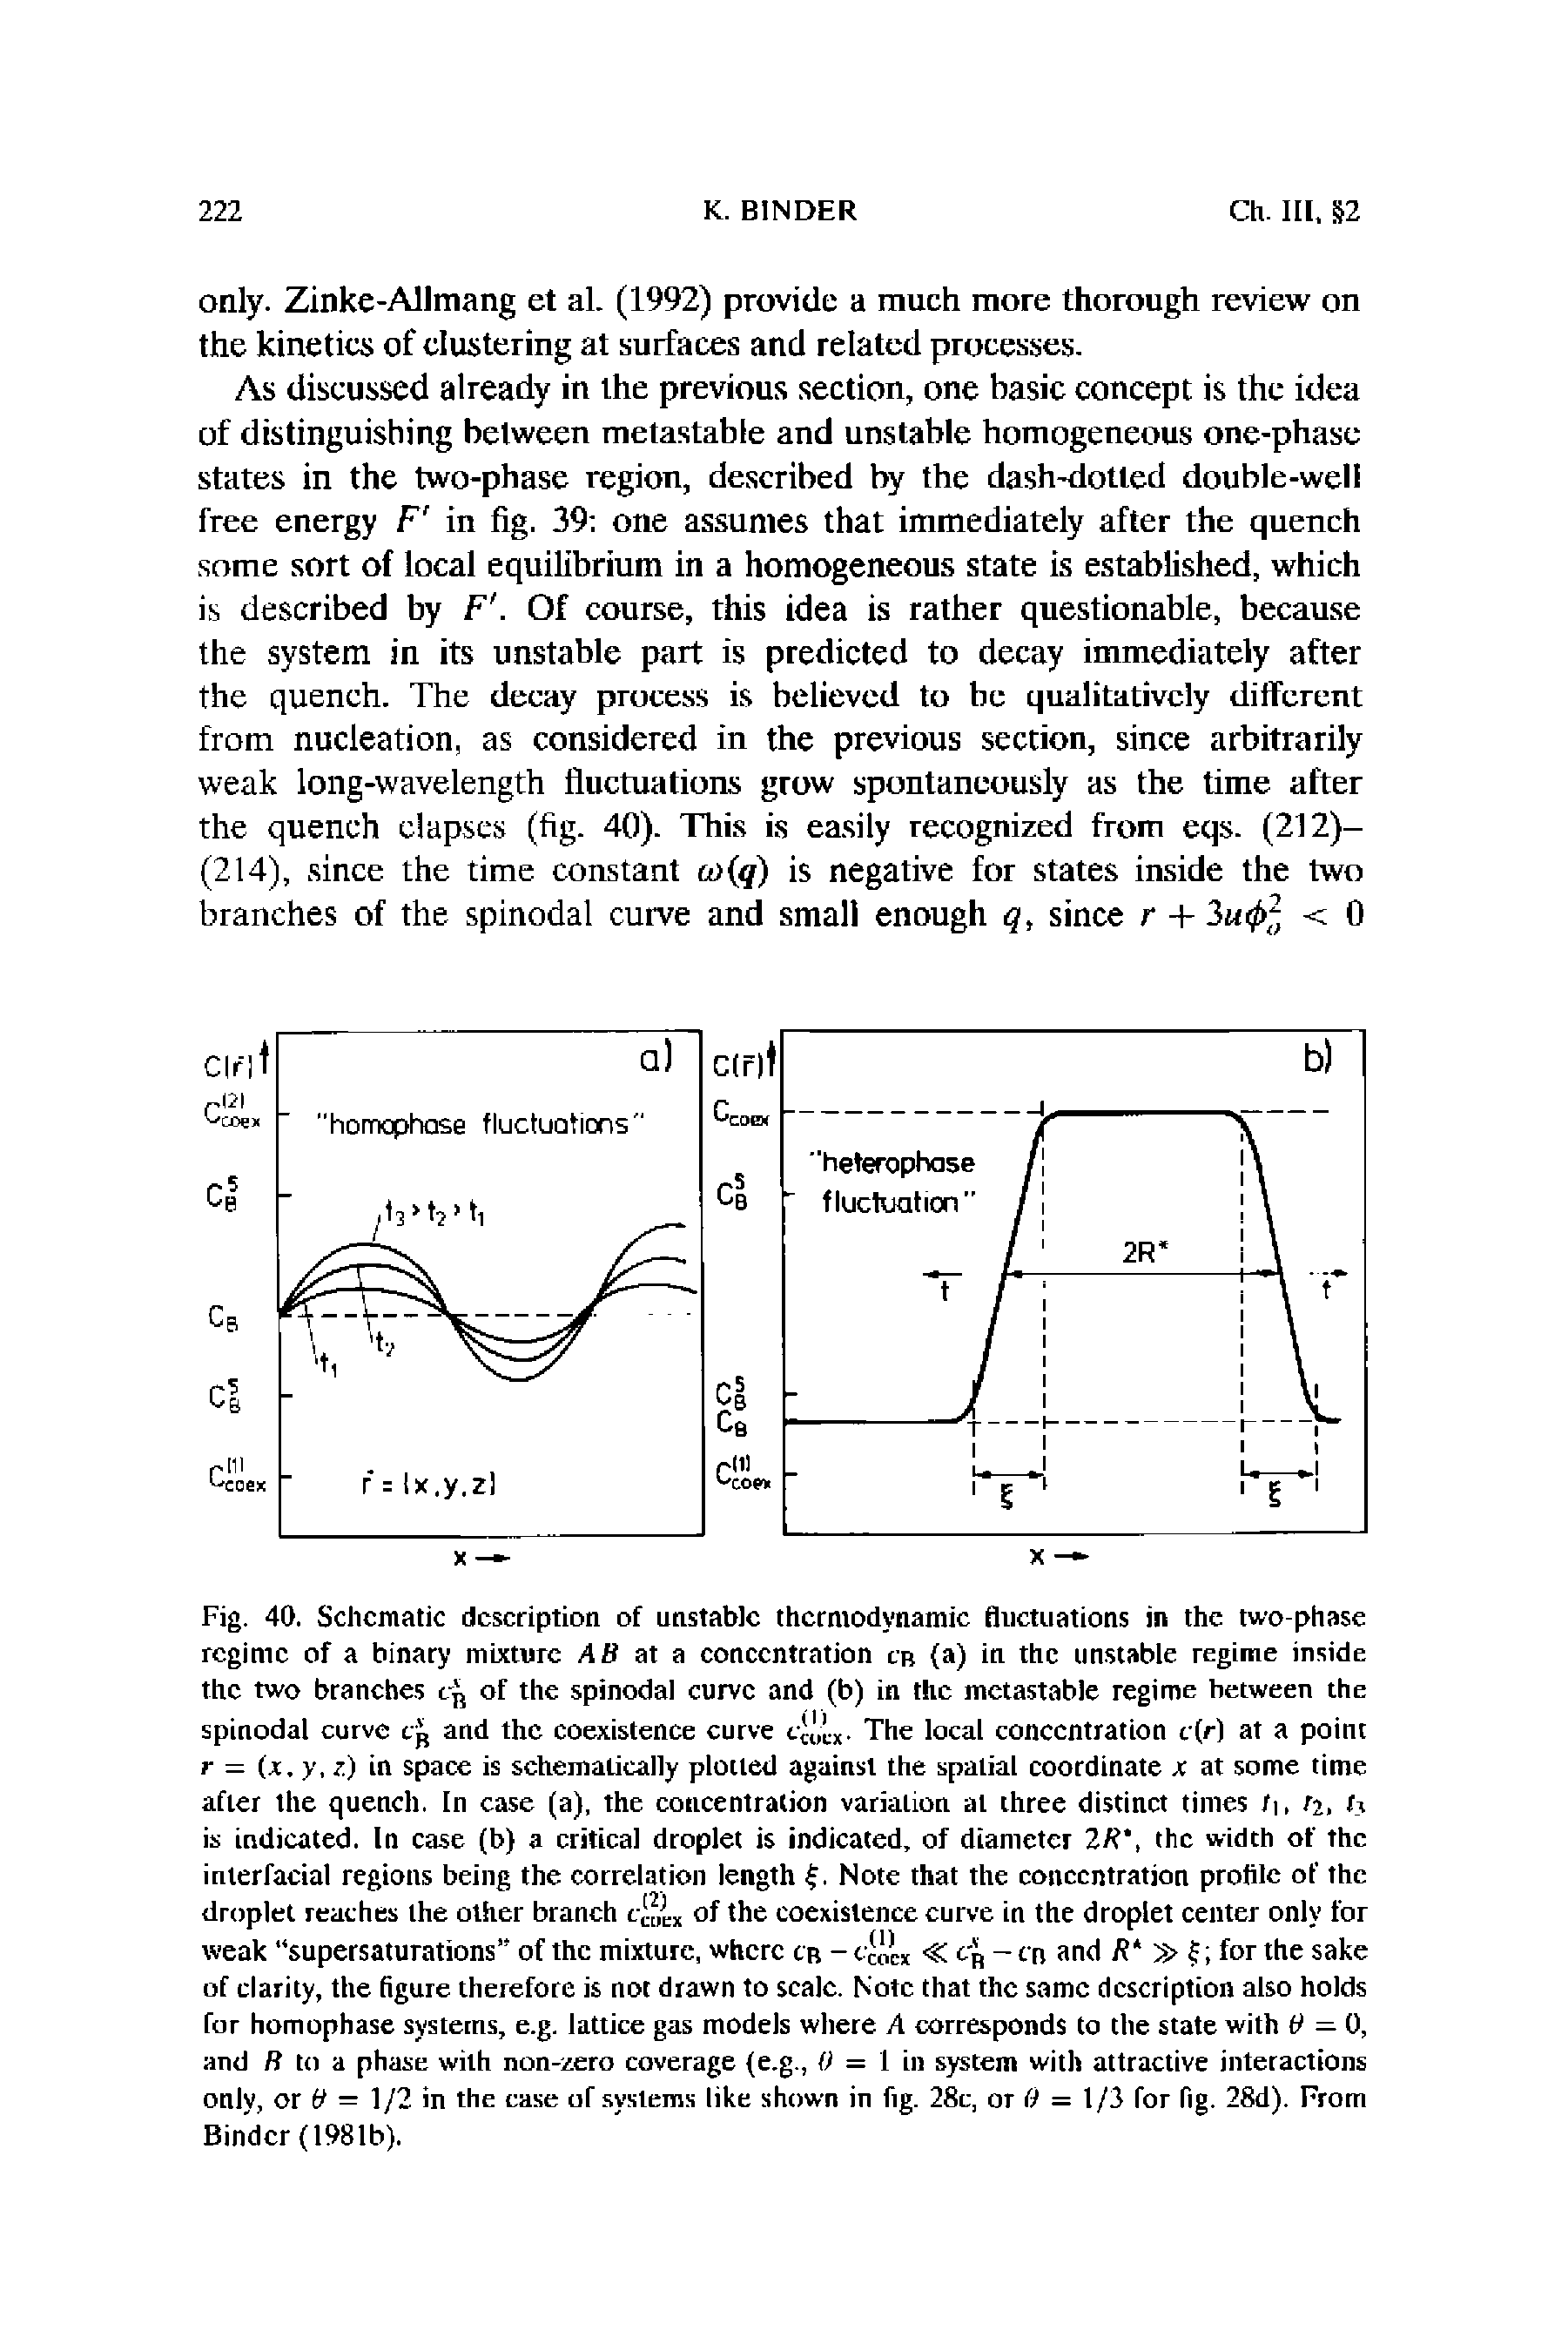 Fig. 40. Schematic description of unstable thermodynamic fluctuations in the two-phase regime of a binary mixture AB at a concentration cb (a) in the unstable regime inside the two branches tp of the spinodal curve and (b) in the metastable regime between the spinodal curve tp and the coexistence curve The local concentration c(r) at a point r = (x. y, z.) in space is schematically plotted against the spatial coordinate x at some time after the quench. In case (a), the concentration variation at three distinct times t, ti, u is indicated. In case (b) a critical droplet is indicated, of diameter 2R , the width of the interfacial regions being the correlation length Note that the concentration profile of the droplet reaches the other branch ini, of the coexistence curve in the droplet center only for weak supersaturations of the mixture, where cb - <K tp - cn and R f, for the sake of clarity, the figure therefore is not drawn to scale. Note that the same description also holds for homophase systems, e.g. lattice gas models where A corresponds to the state with 0 = 0, and R to a phase with non-zero coverage (e.g., 0 = 1 in system with attractive interactions only, or — 1/2 in the ease of systems like shown in fig. 28c, or 0 = 1/2 for fig. 28d). From Binder (1981b).